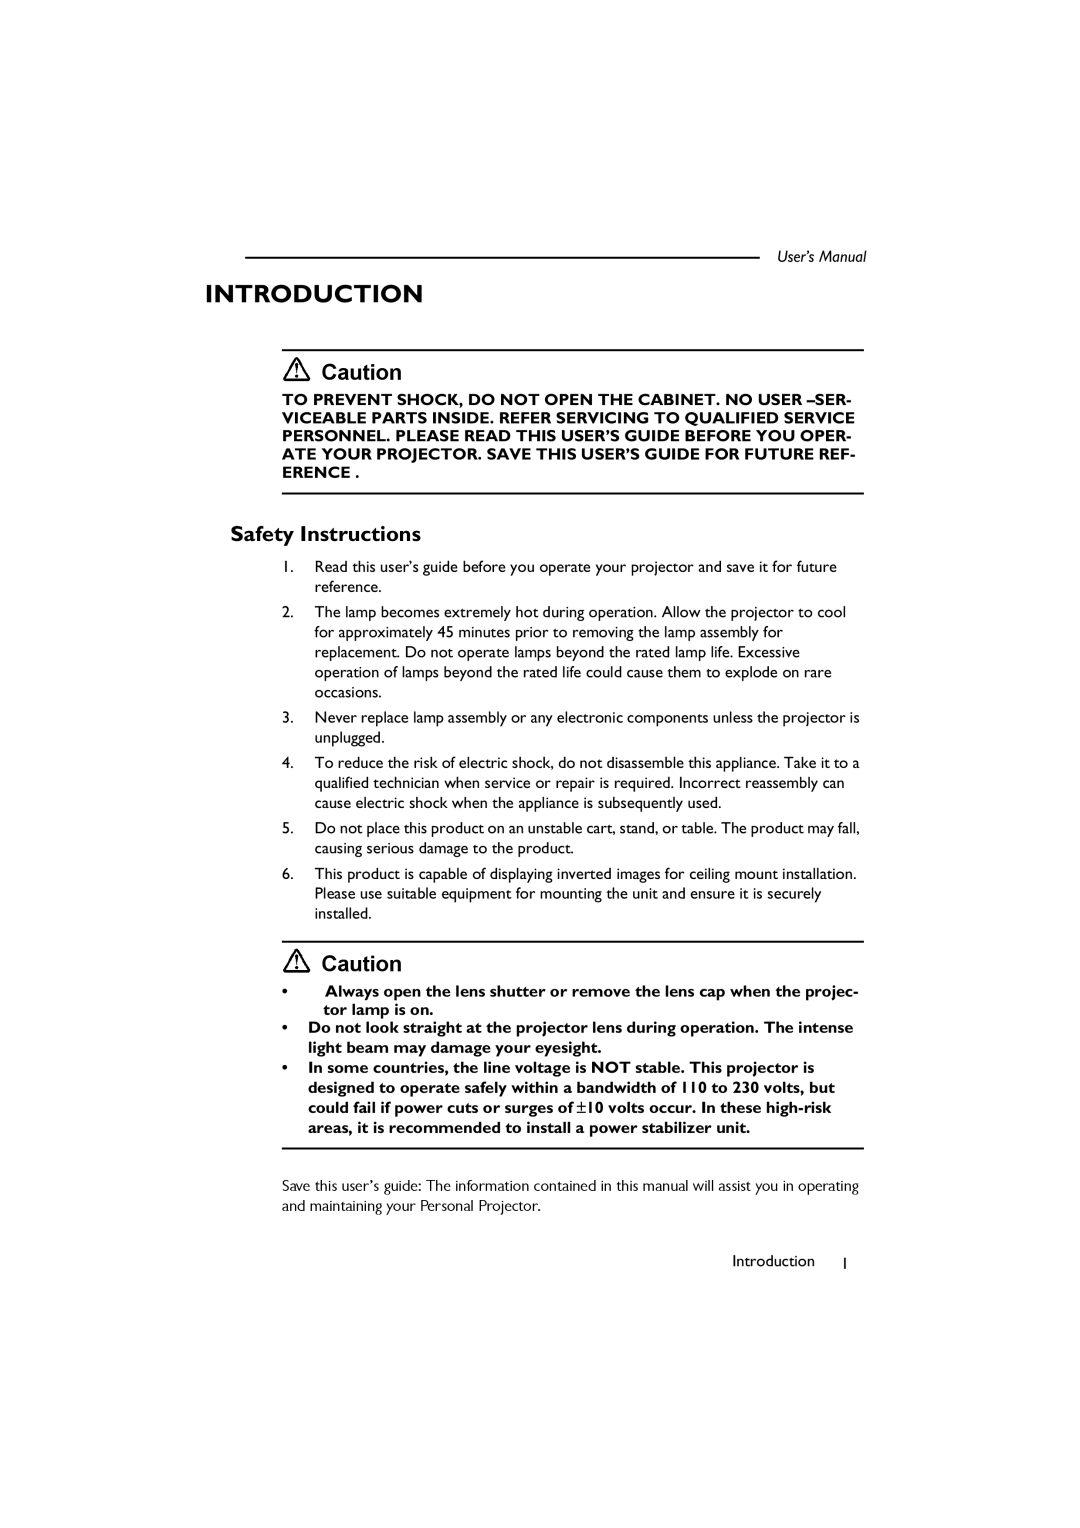 BenQ SL 705X/S user manual Introduction, Safety Instructions 